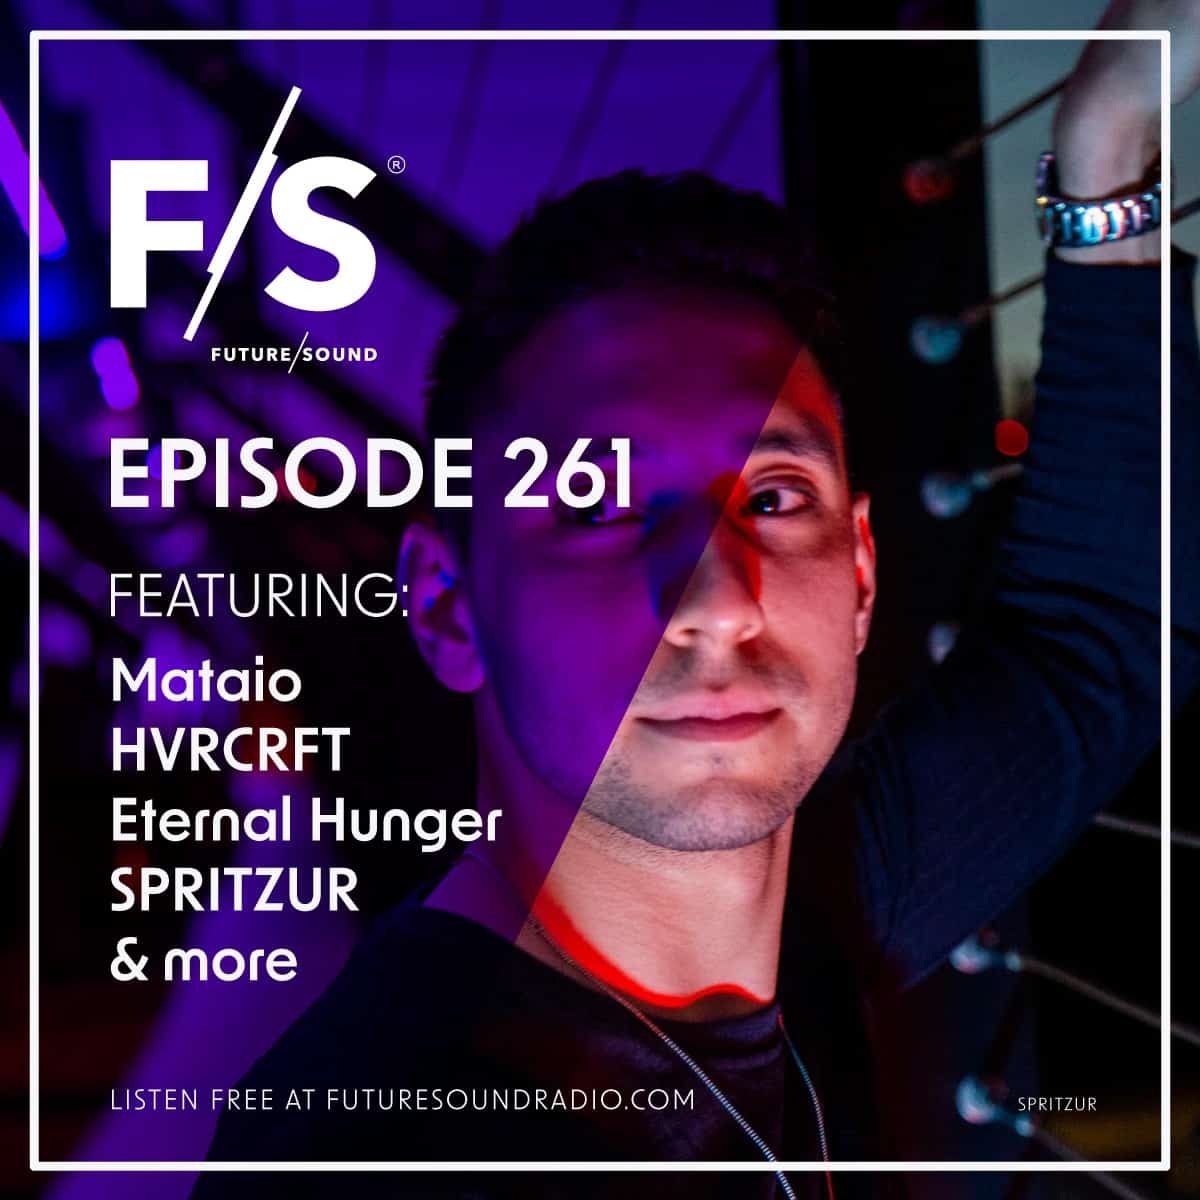 Future/Sound Episode 261 feat. Mataio, HVRCRFT, Eternal Hunger, SPRITZUR, and more